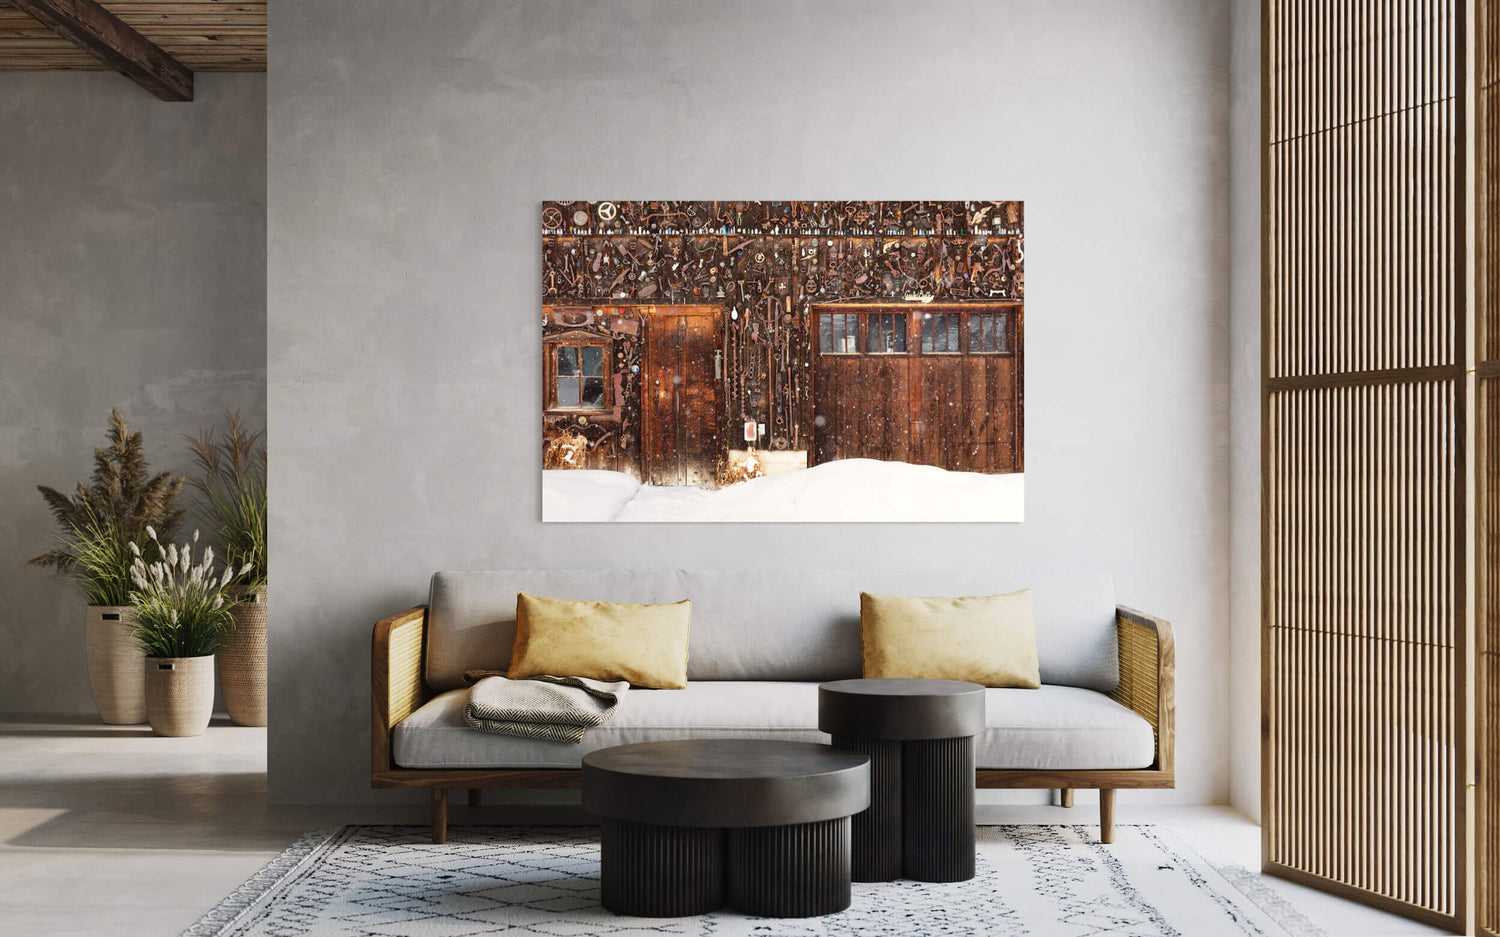 A Crested Butte picture of a snowed-in cabin in winter hangs in a living room.